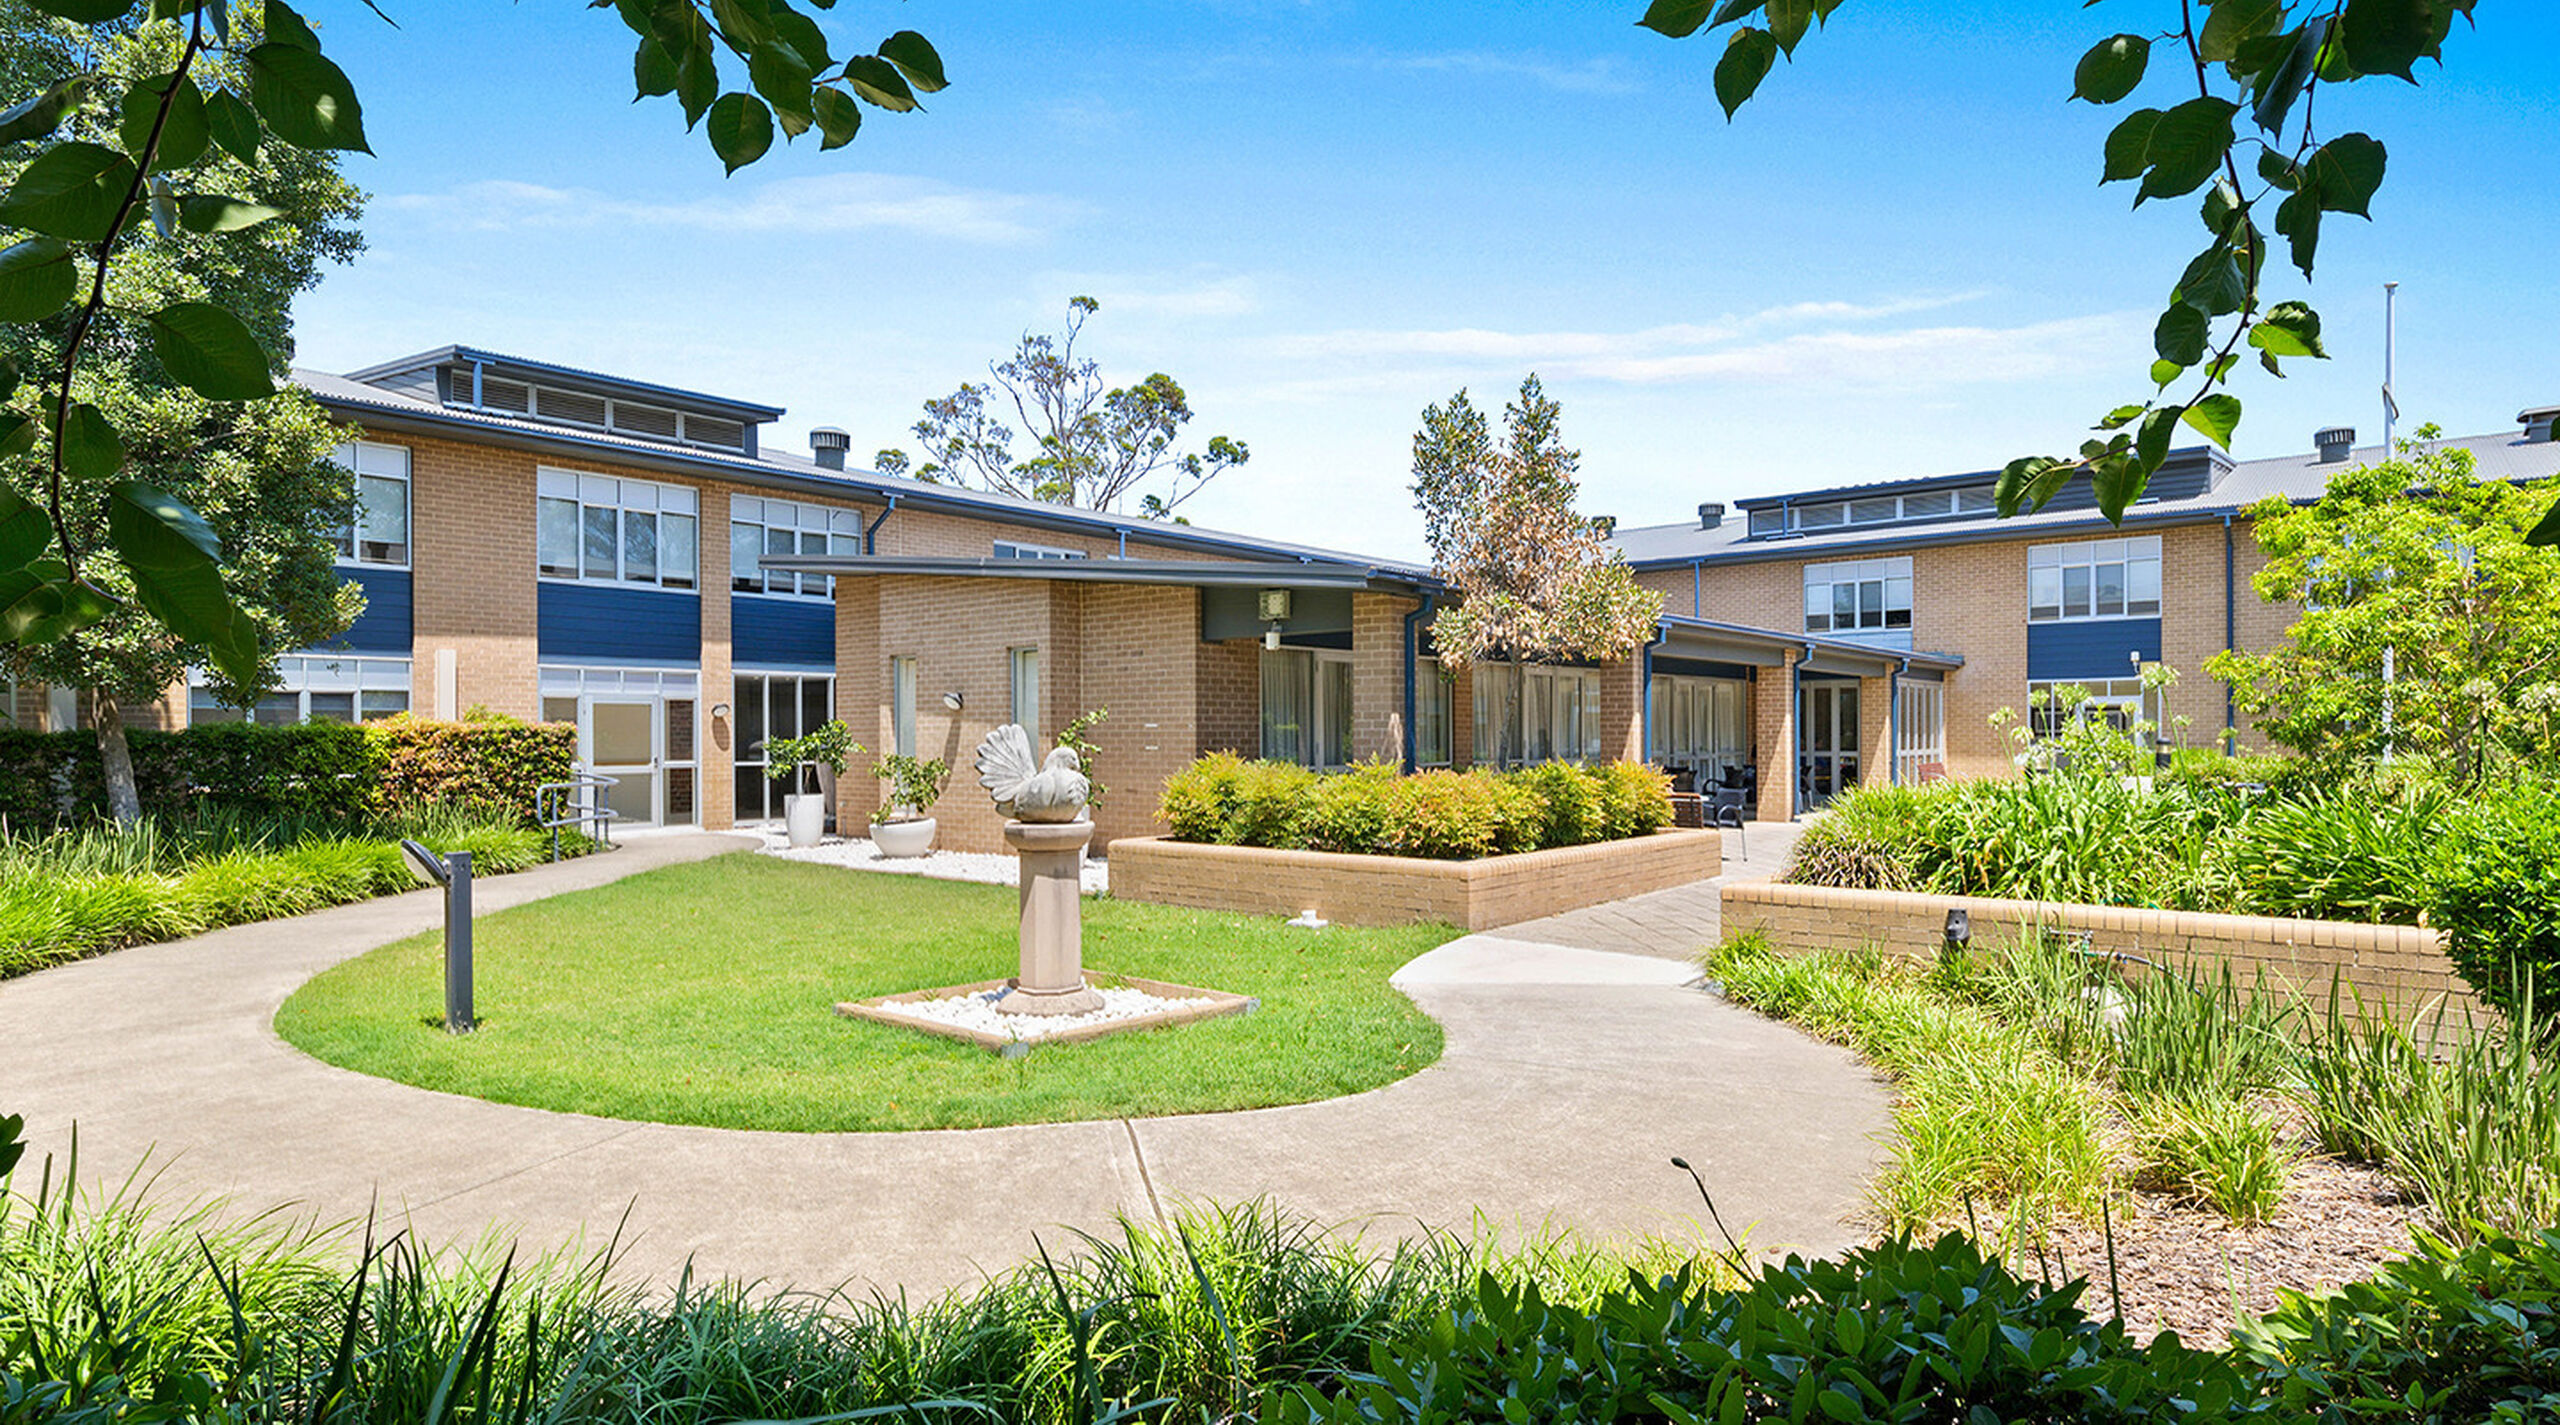 beautiful large gardens at the entrance of baptistcare shalom centre modern aged care home providing low level care and dementia care for aged care residents in macquarie park nsw